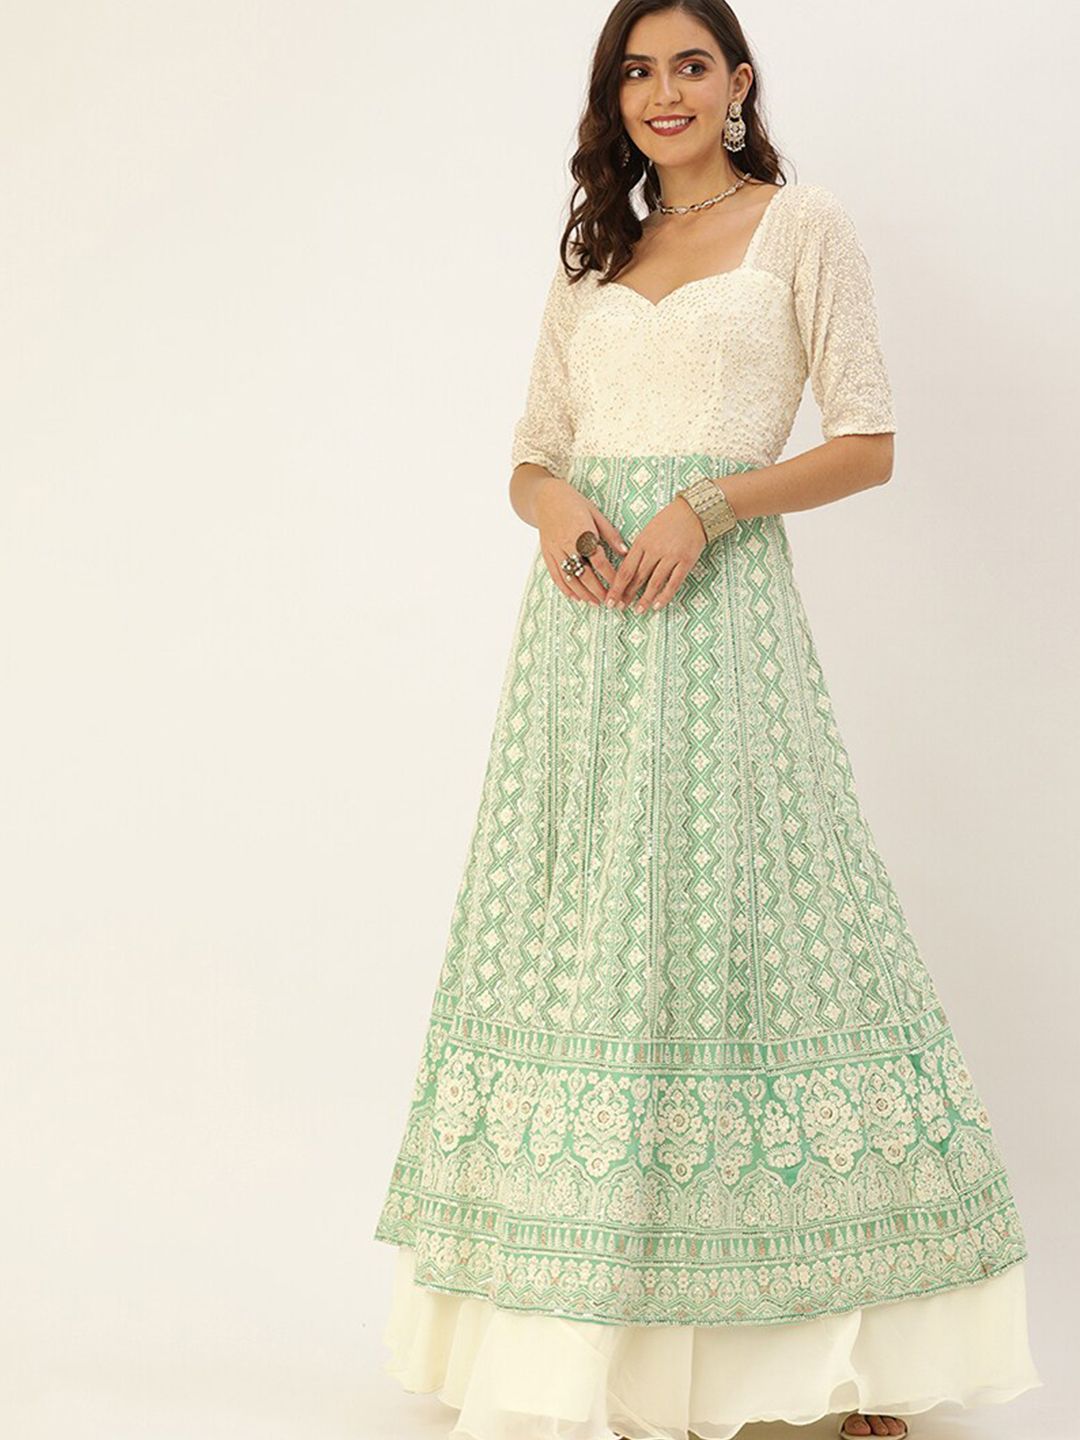 Ethnovog Green  Off White Floral Embroidered Maxi Dress Price in India